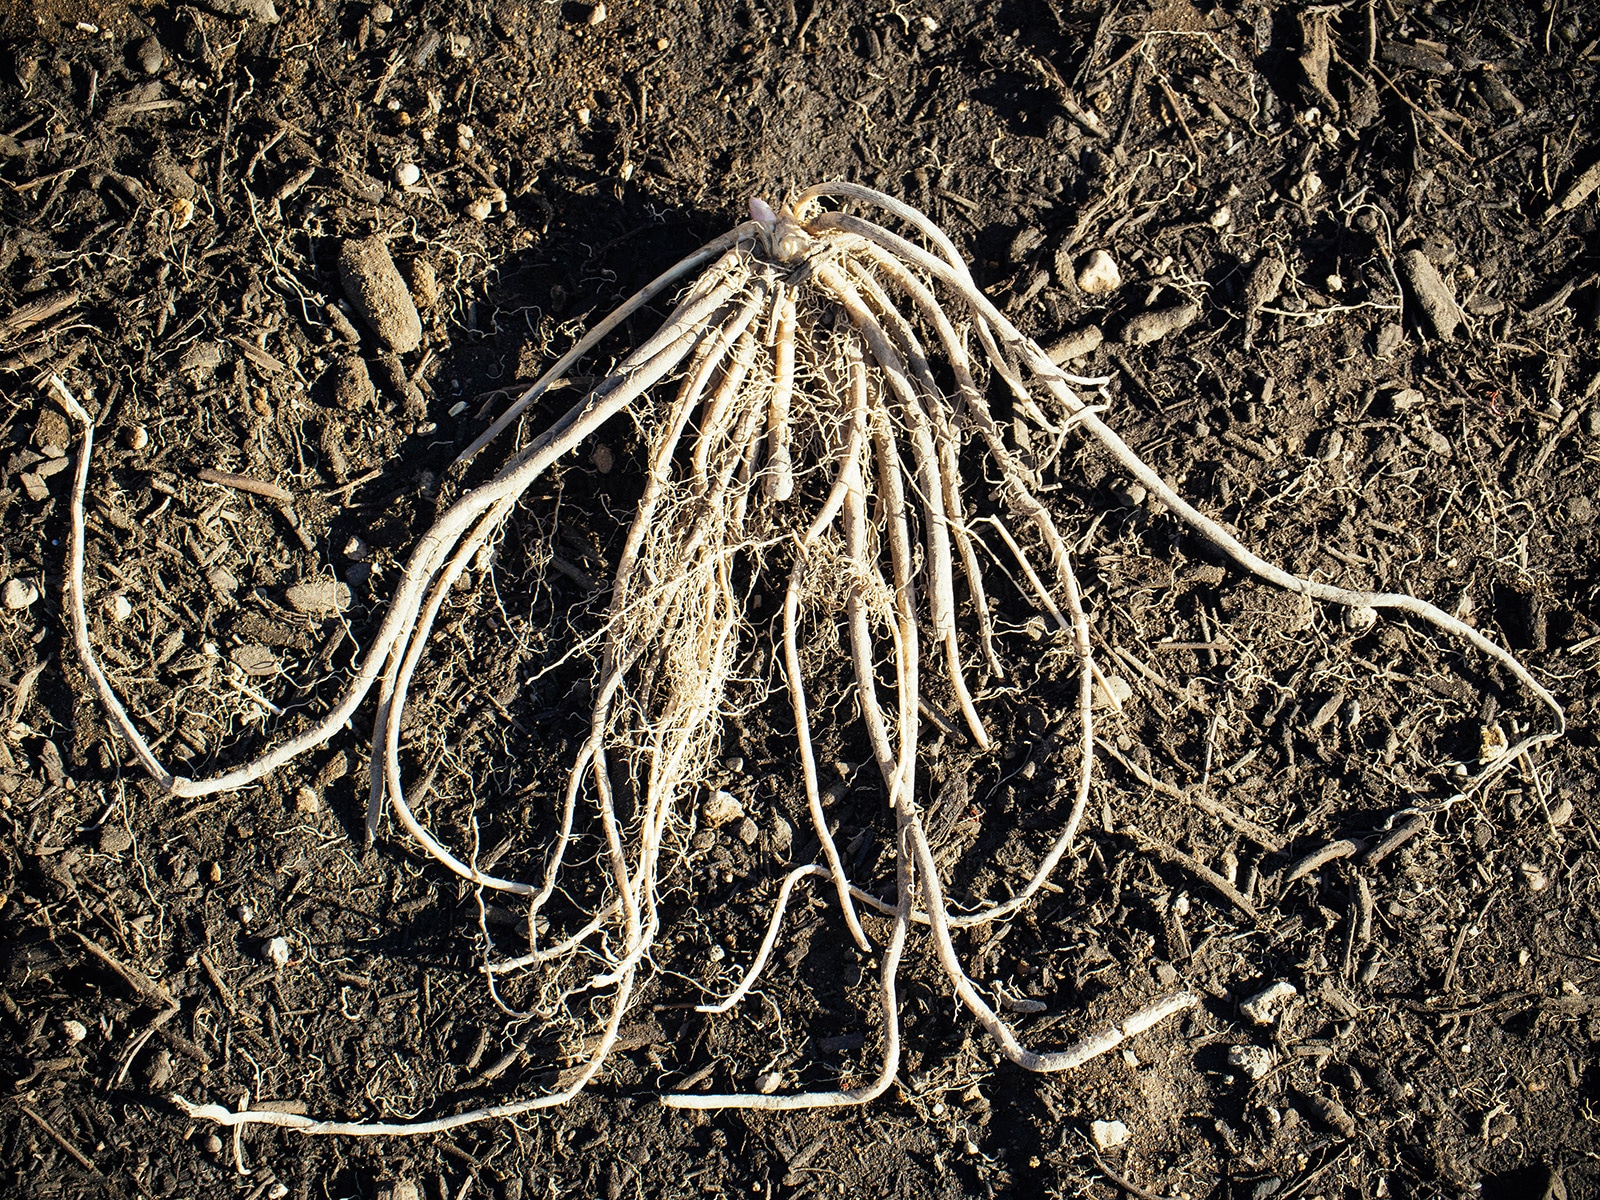 One-year-old asparagus crown in the soil